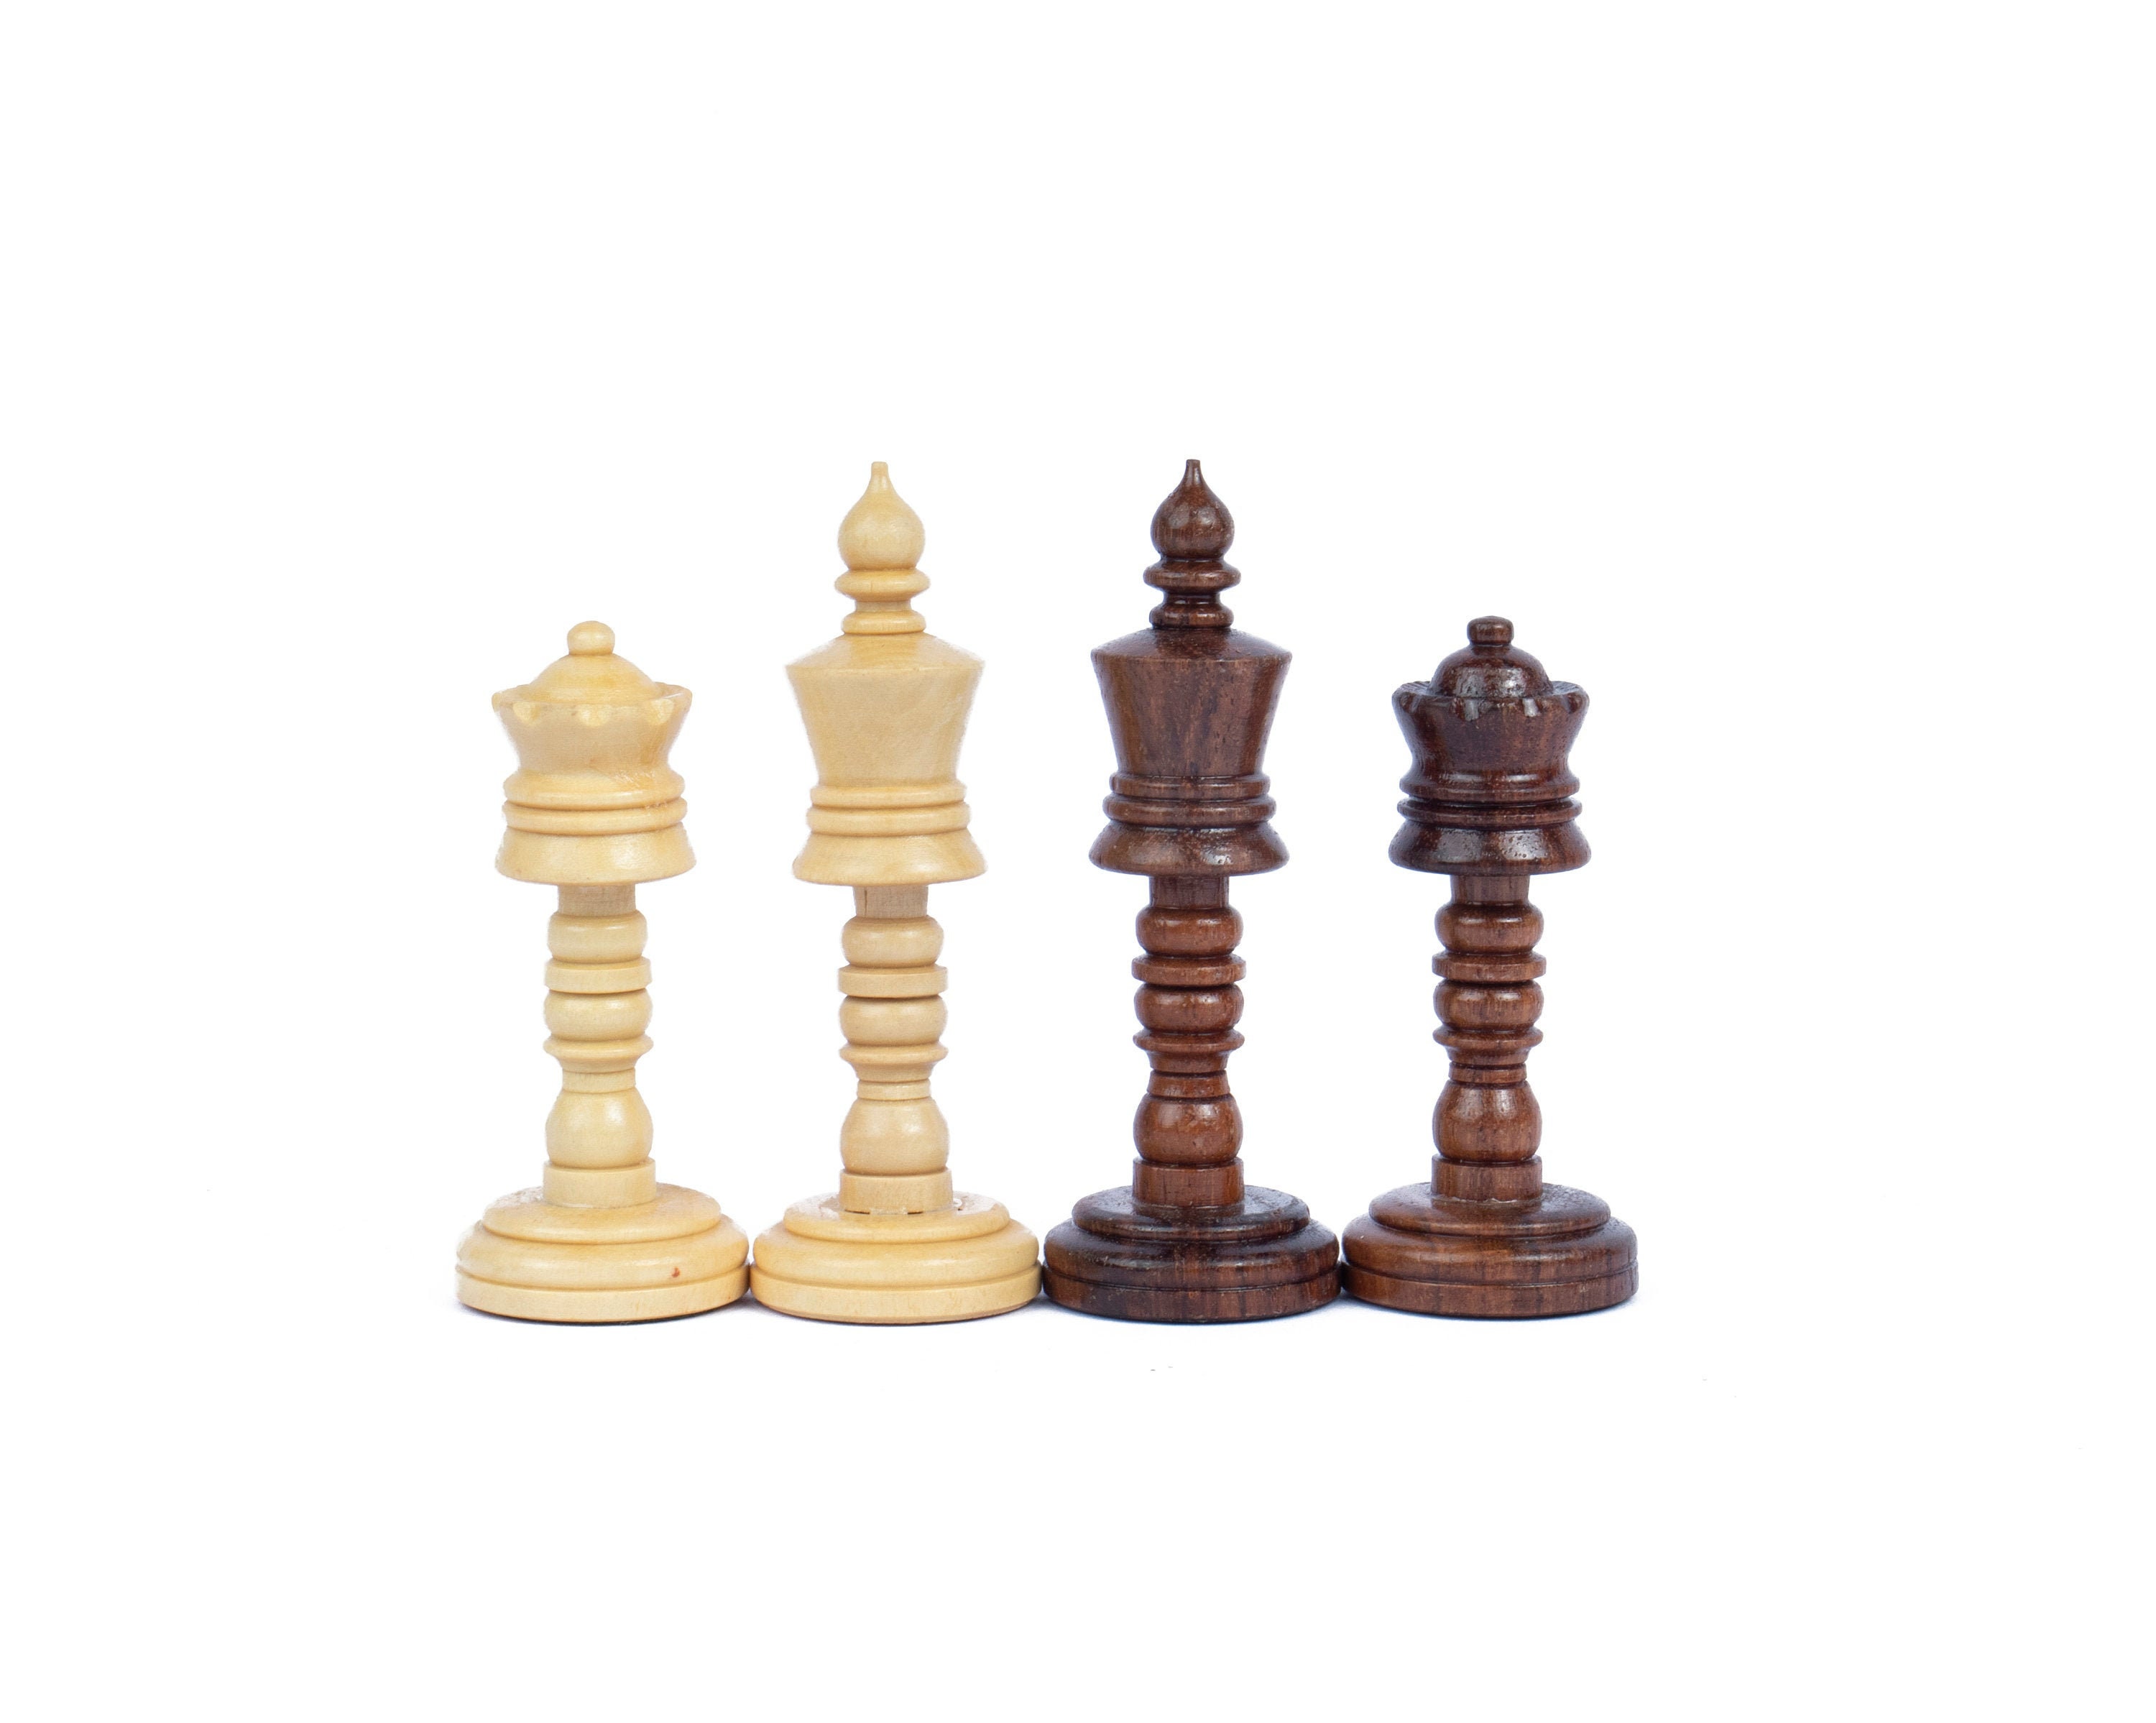 THE REPRODUCTION OF 1960 MIKHAIL TAL CHESS SET CRIMSON BOXWOOD & EBONIZED  4.125 KING WITH 2 SQUARE CHESS BOARD